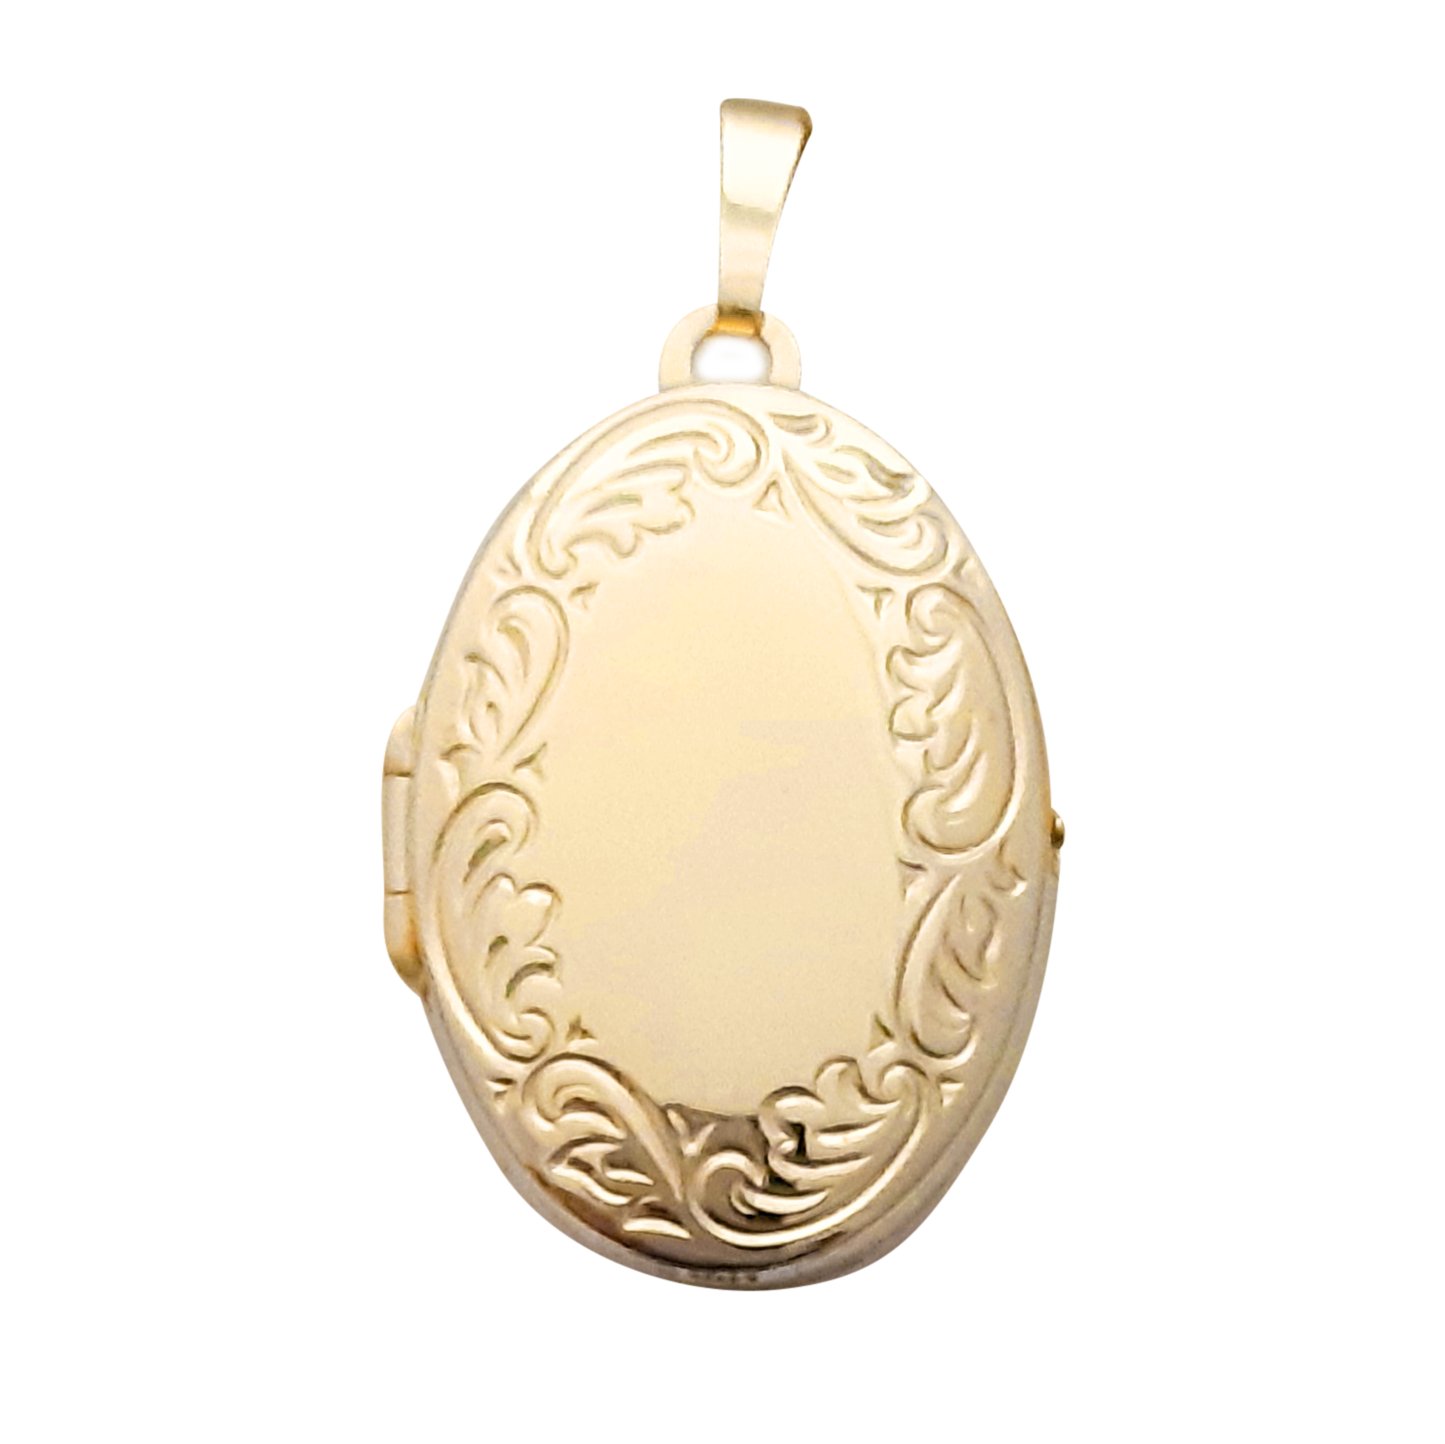 9ct 28mm Oval Family Border Engrvd